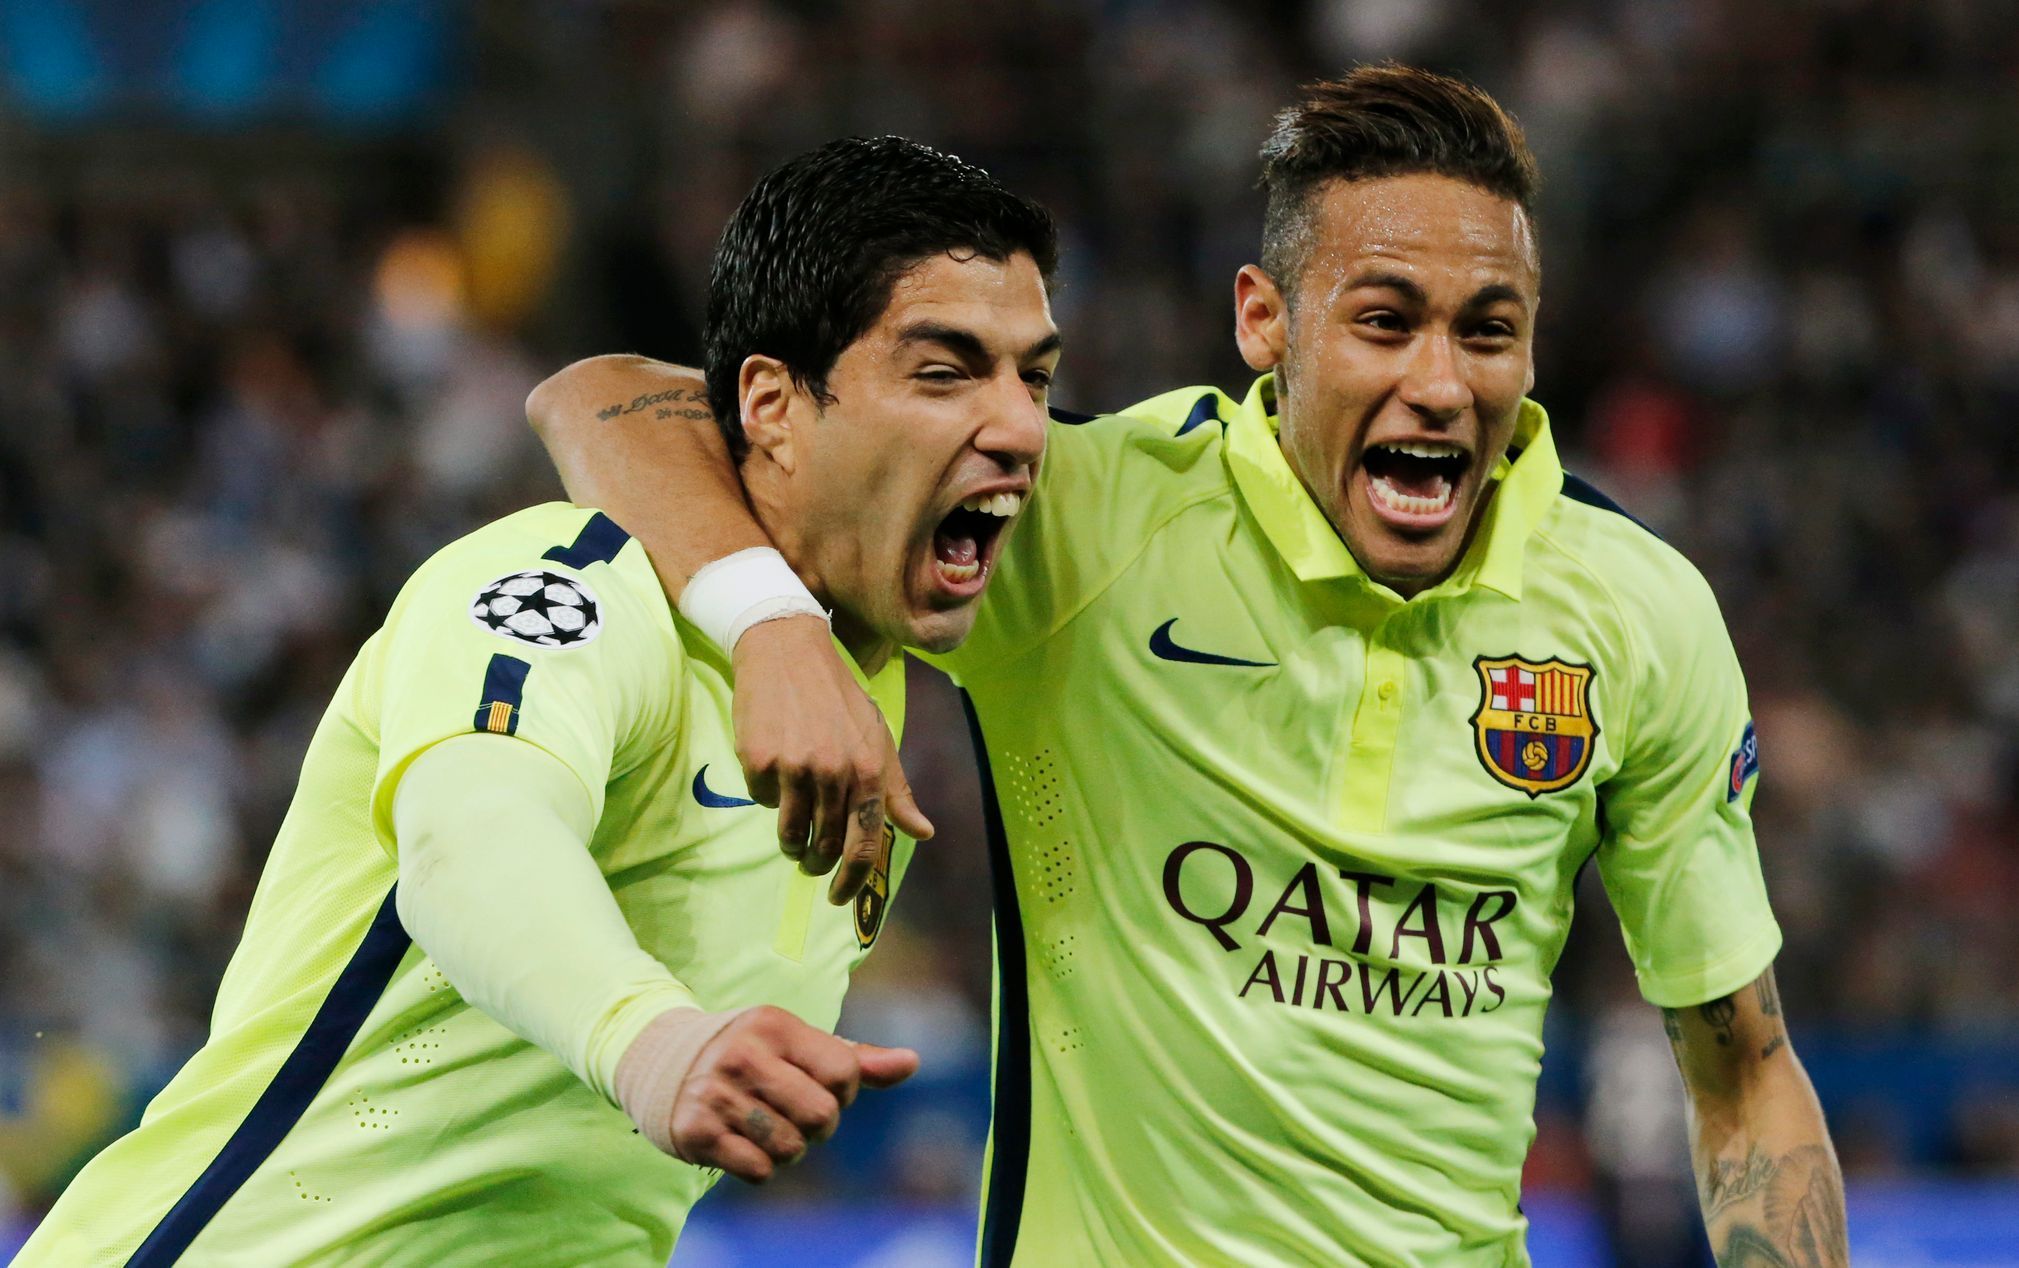 Football: Luis Suarez (L) celebrates with Neymar after scoring the second goal for Barcelona